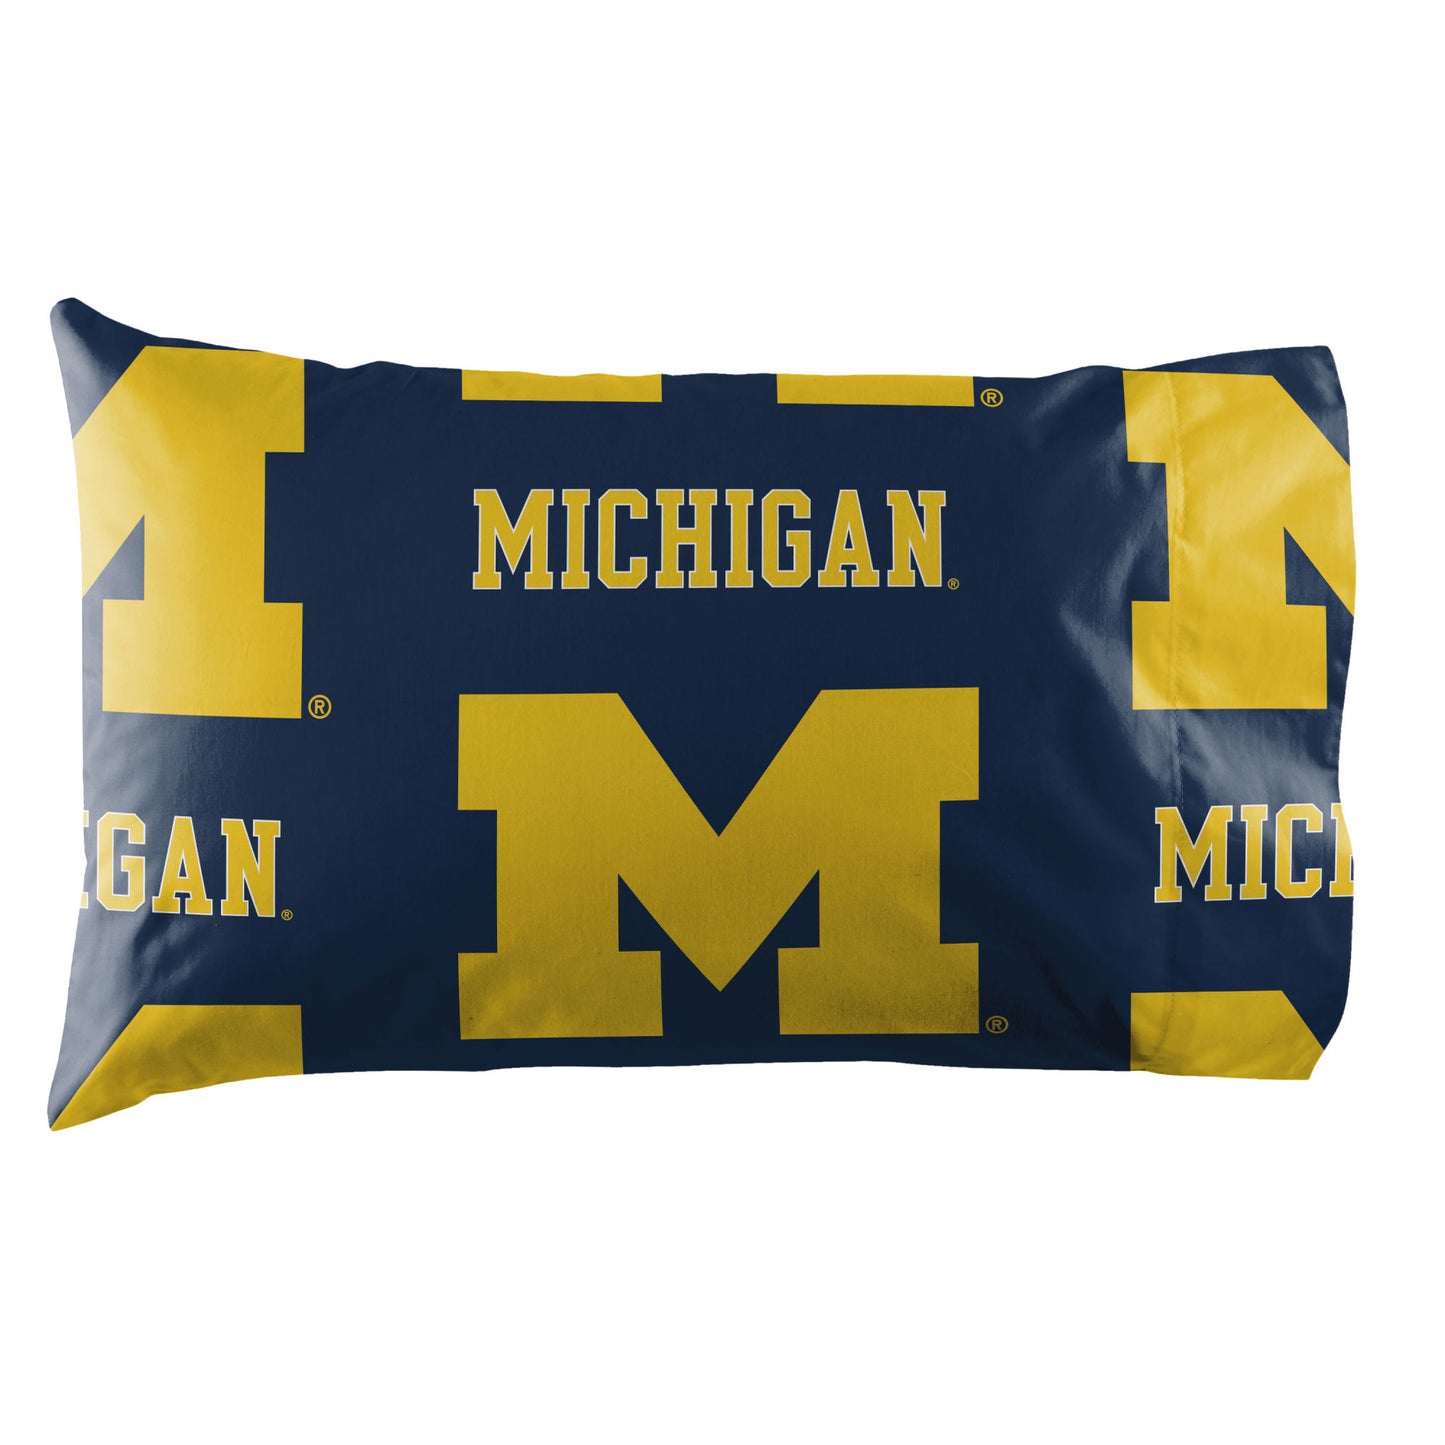 Michigan Wolverines Rotary Queen Bed In a Bag Set